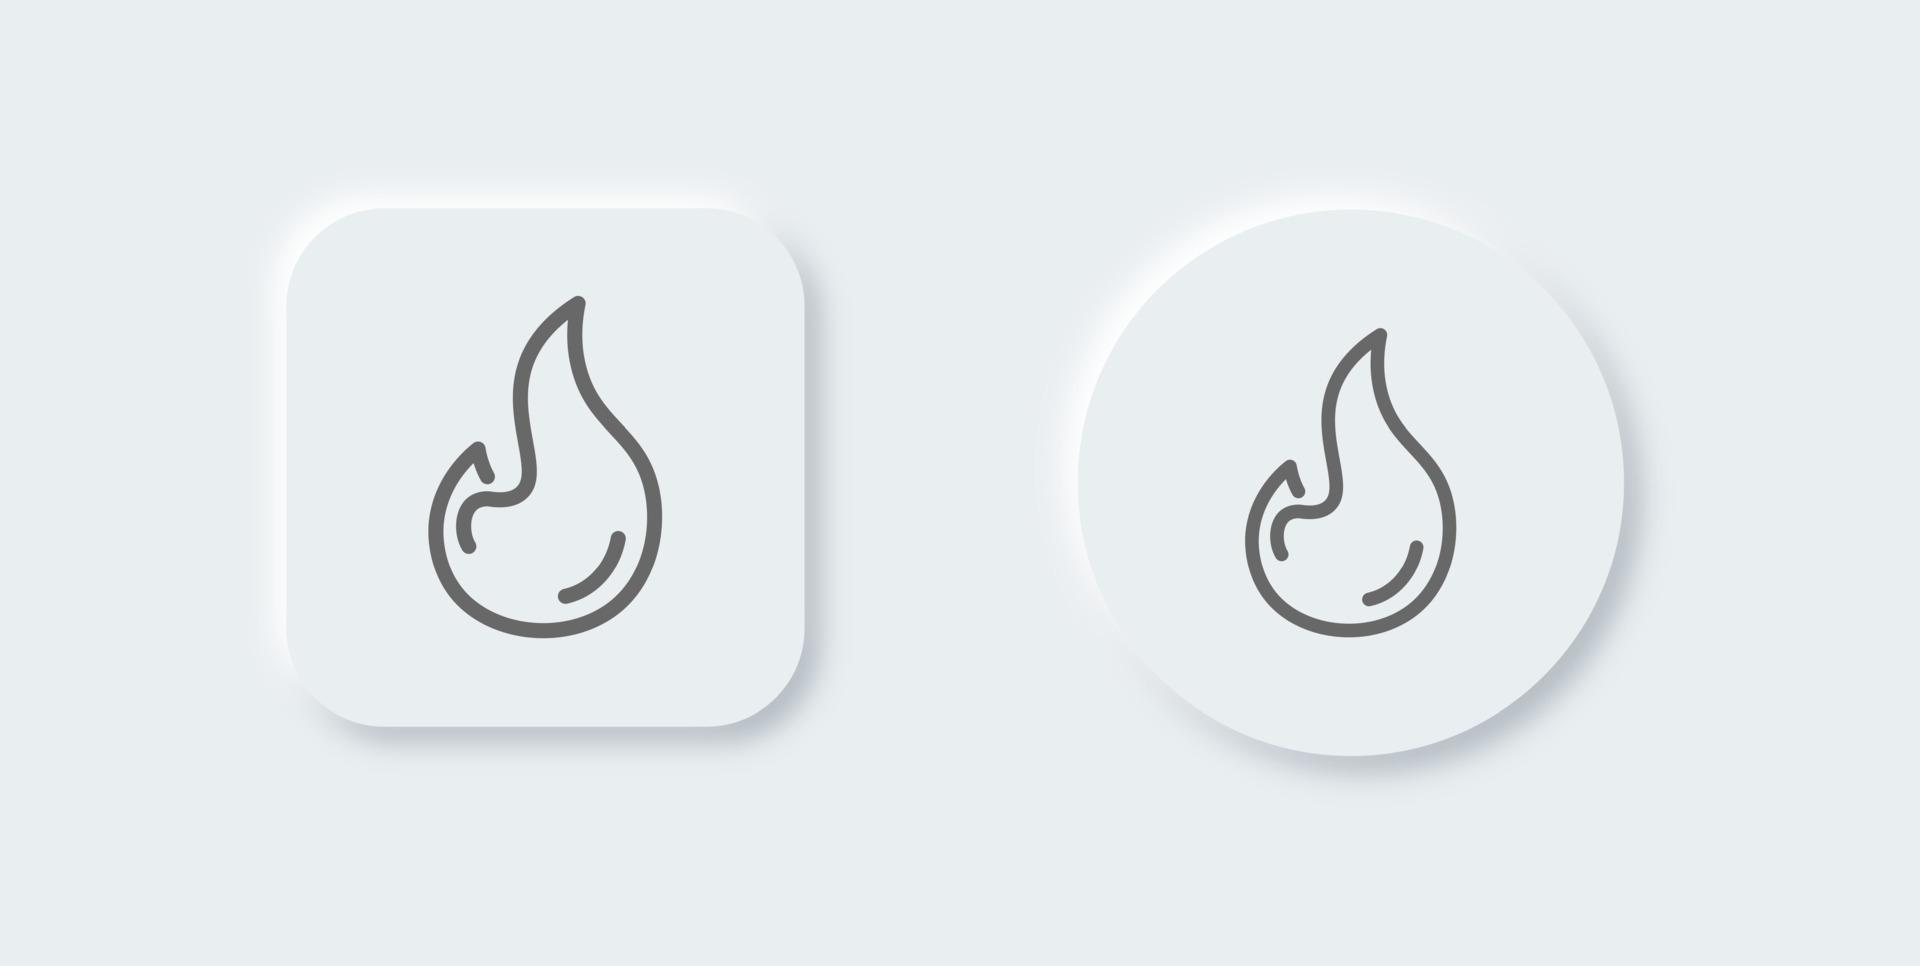 Fire line icon in neomorphic design style. Flame signs vector illustration.